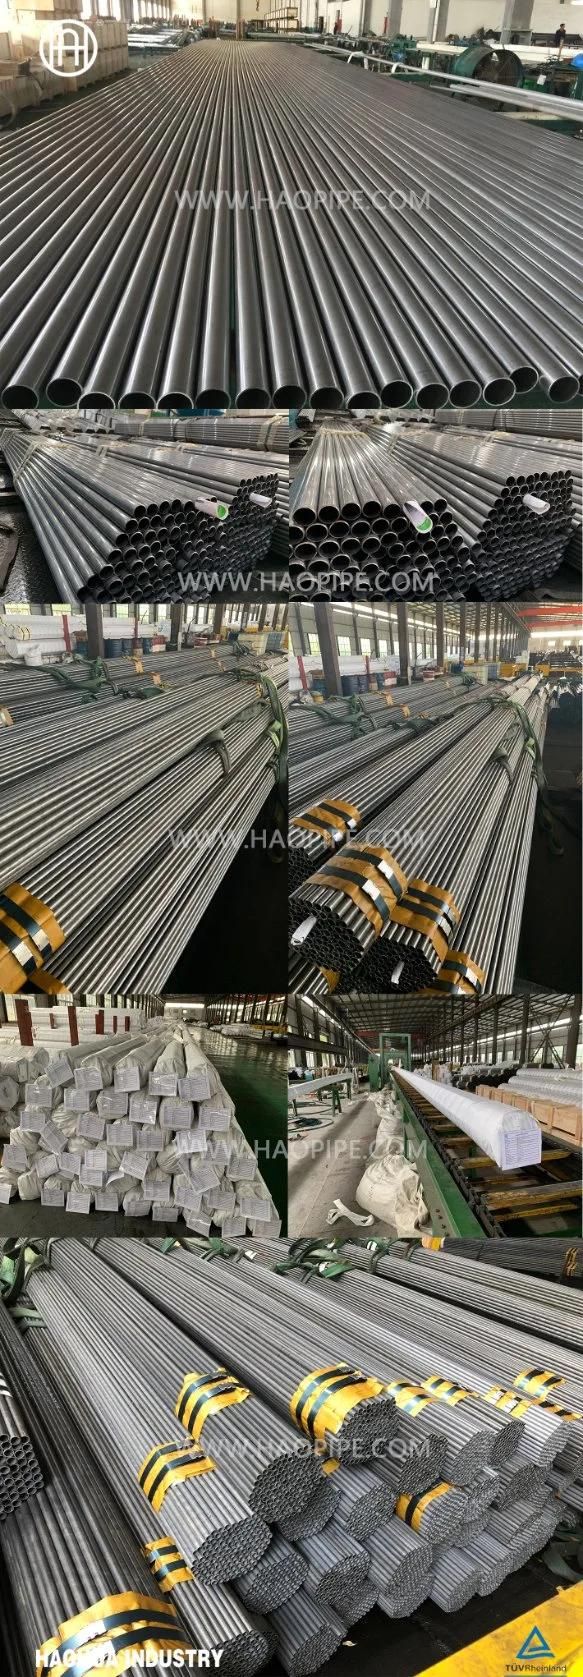 ASTM A179/ASTM A192/ASTM A519 Seamless Steel Tube for Heat Exchanger